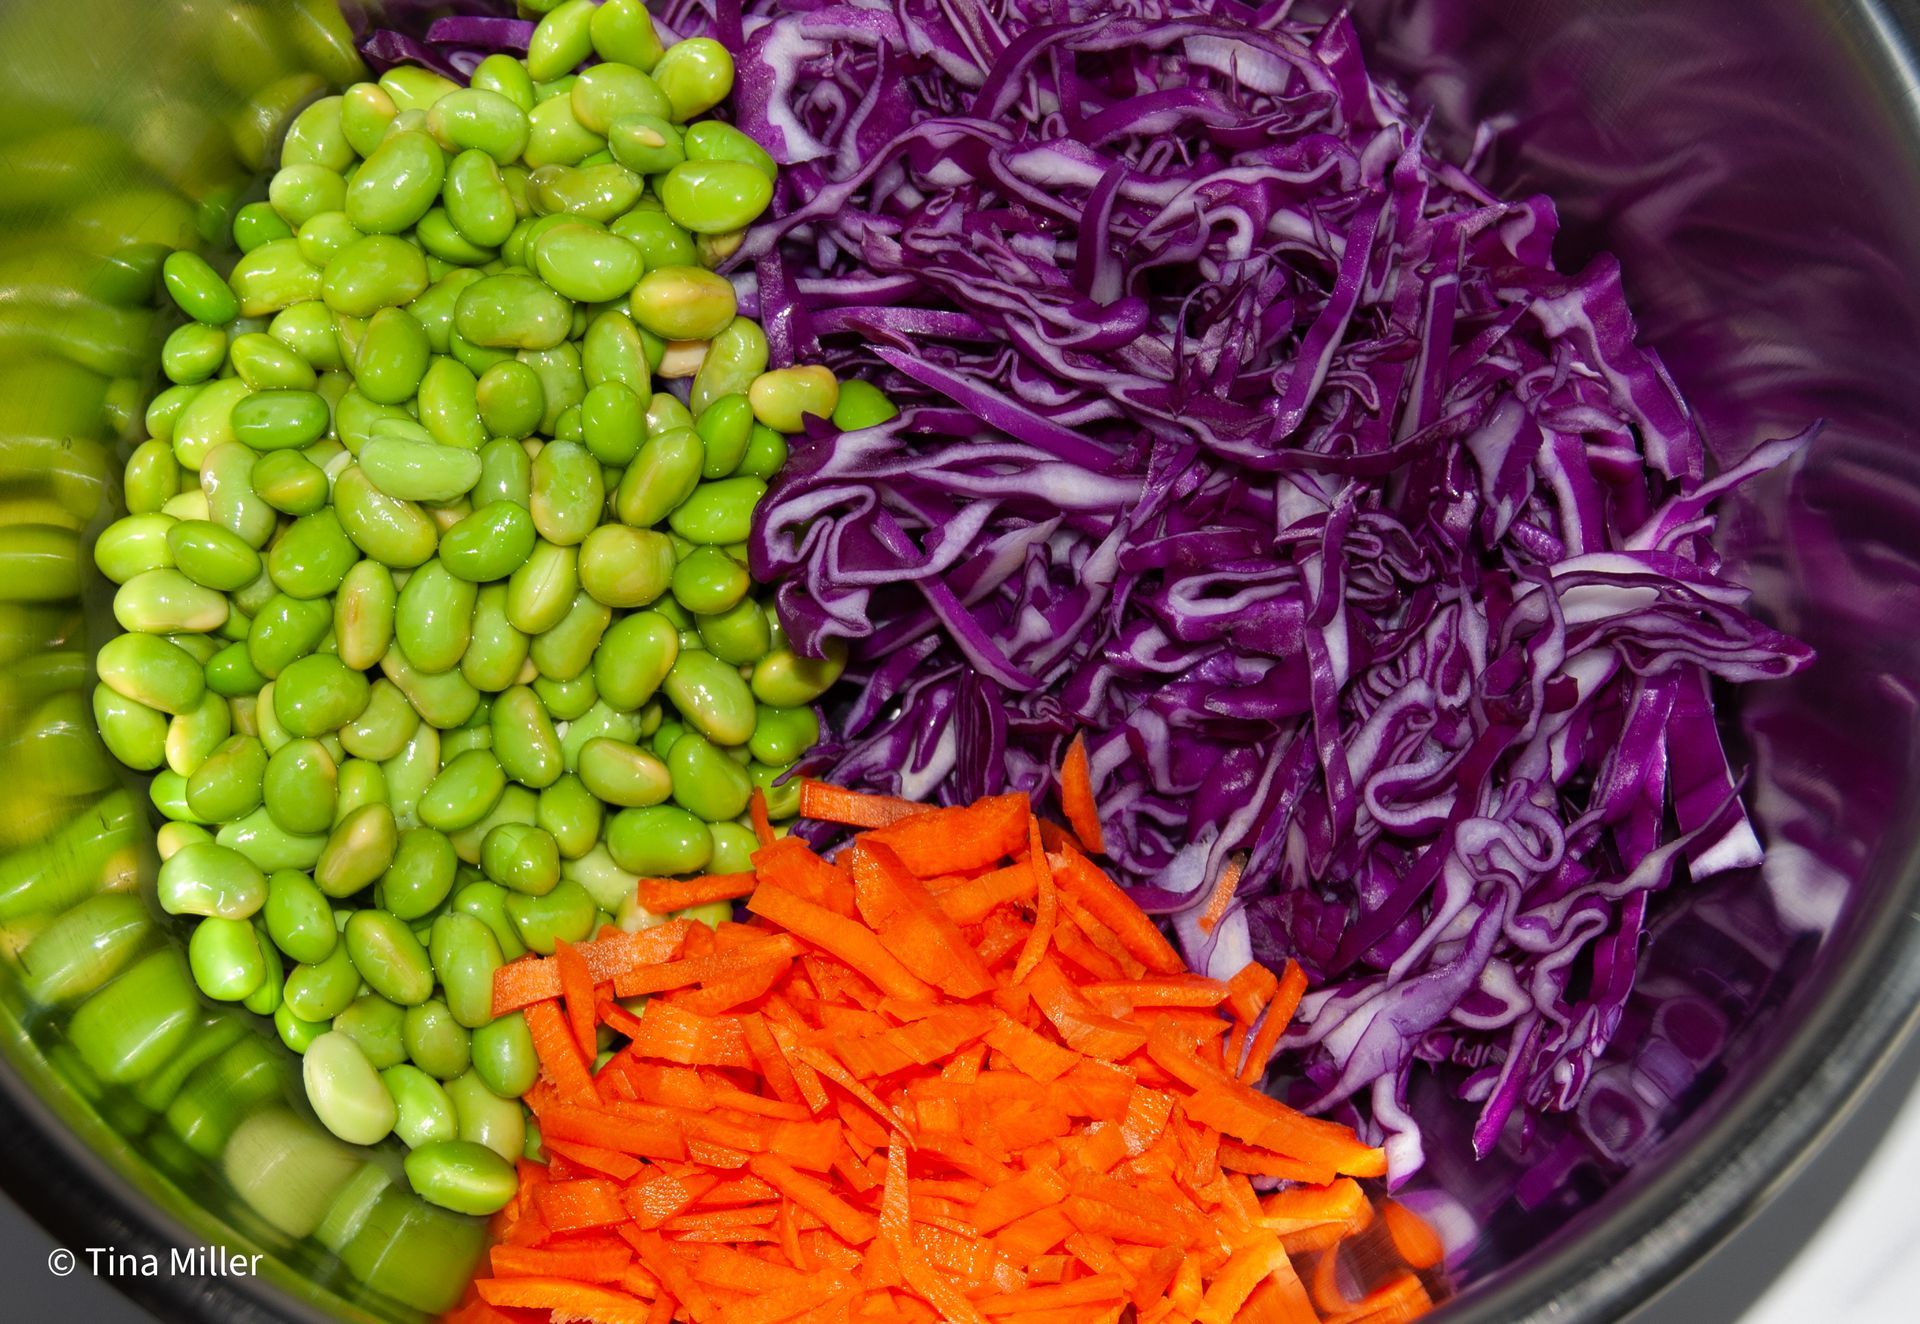 Bright green shelled edamame, shredded red cabbage, and orange julienne carrots in a metal mixing bowl.